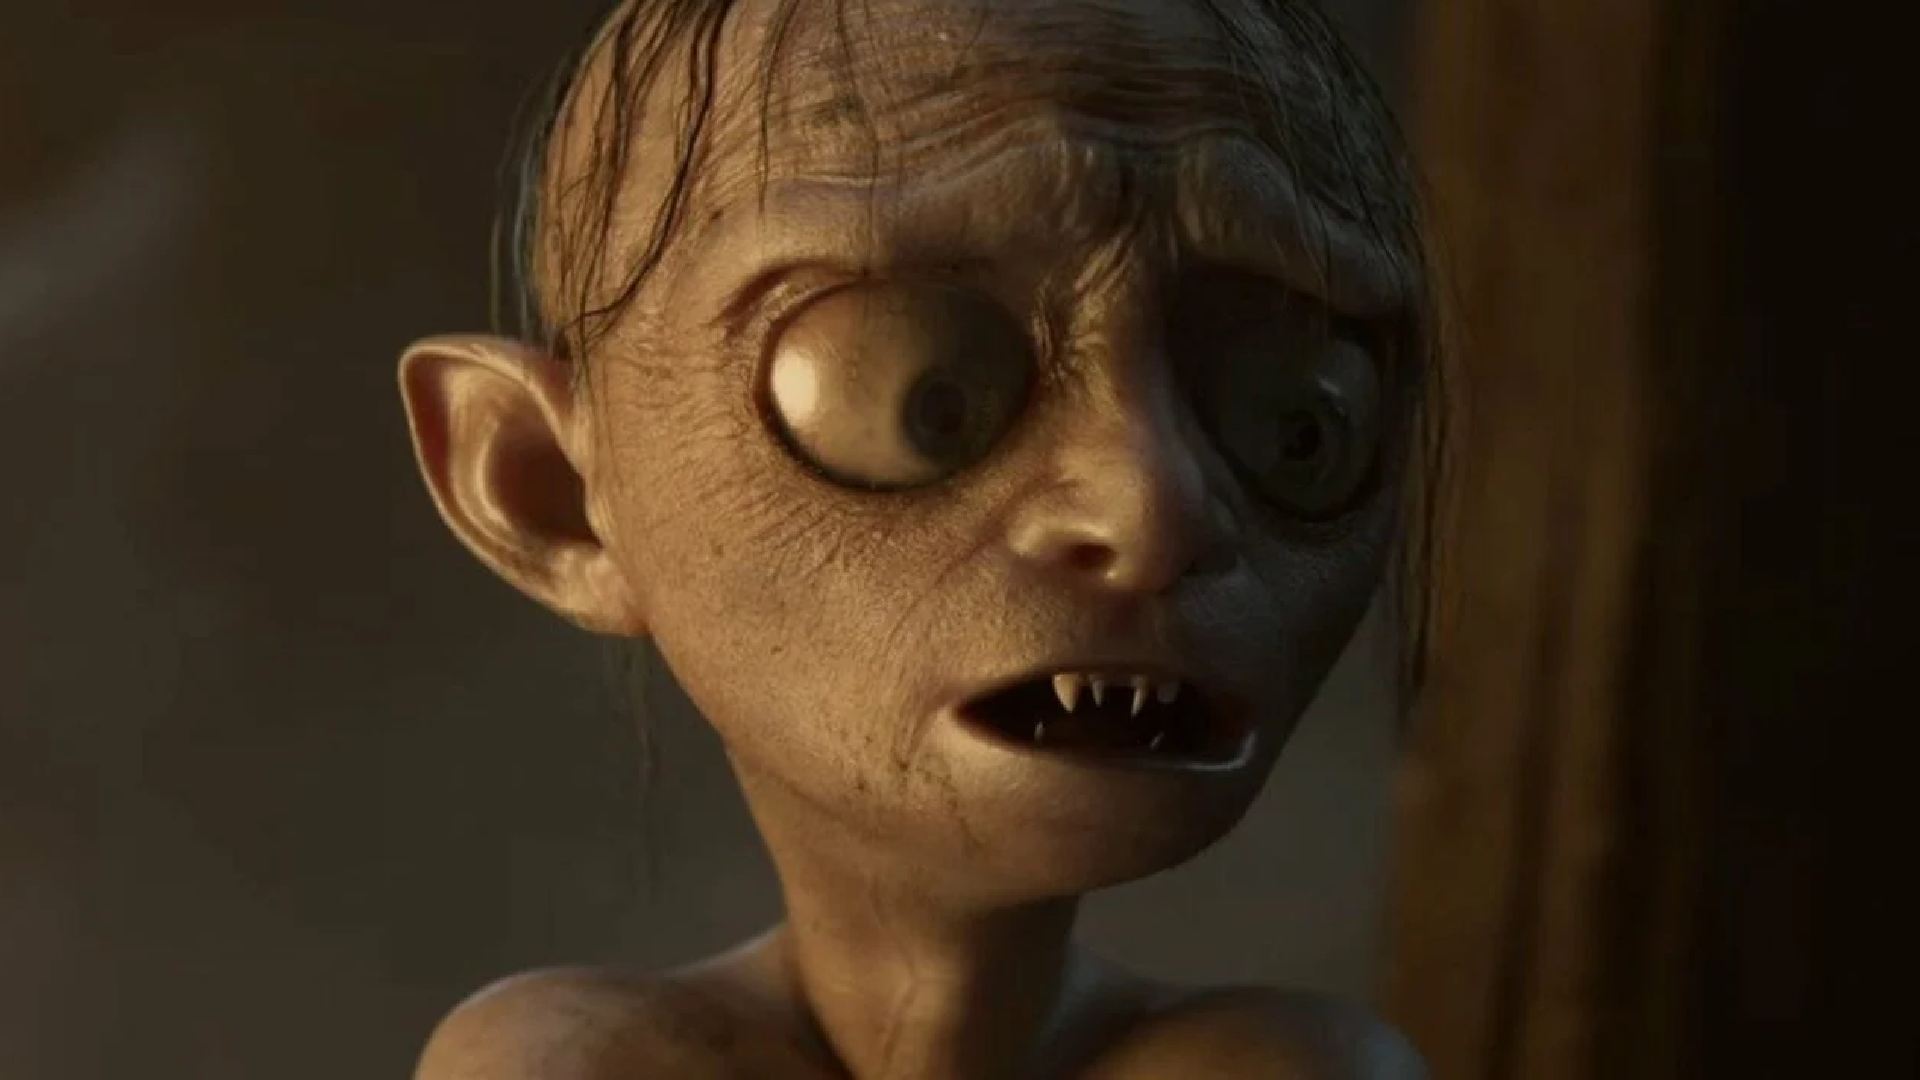 The Lord of the Rings Gollum release date, story, gameplay